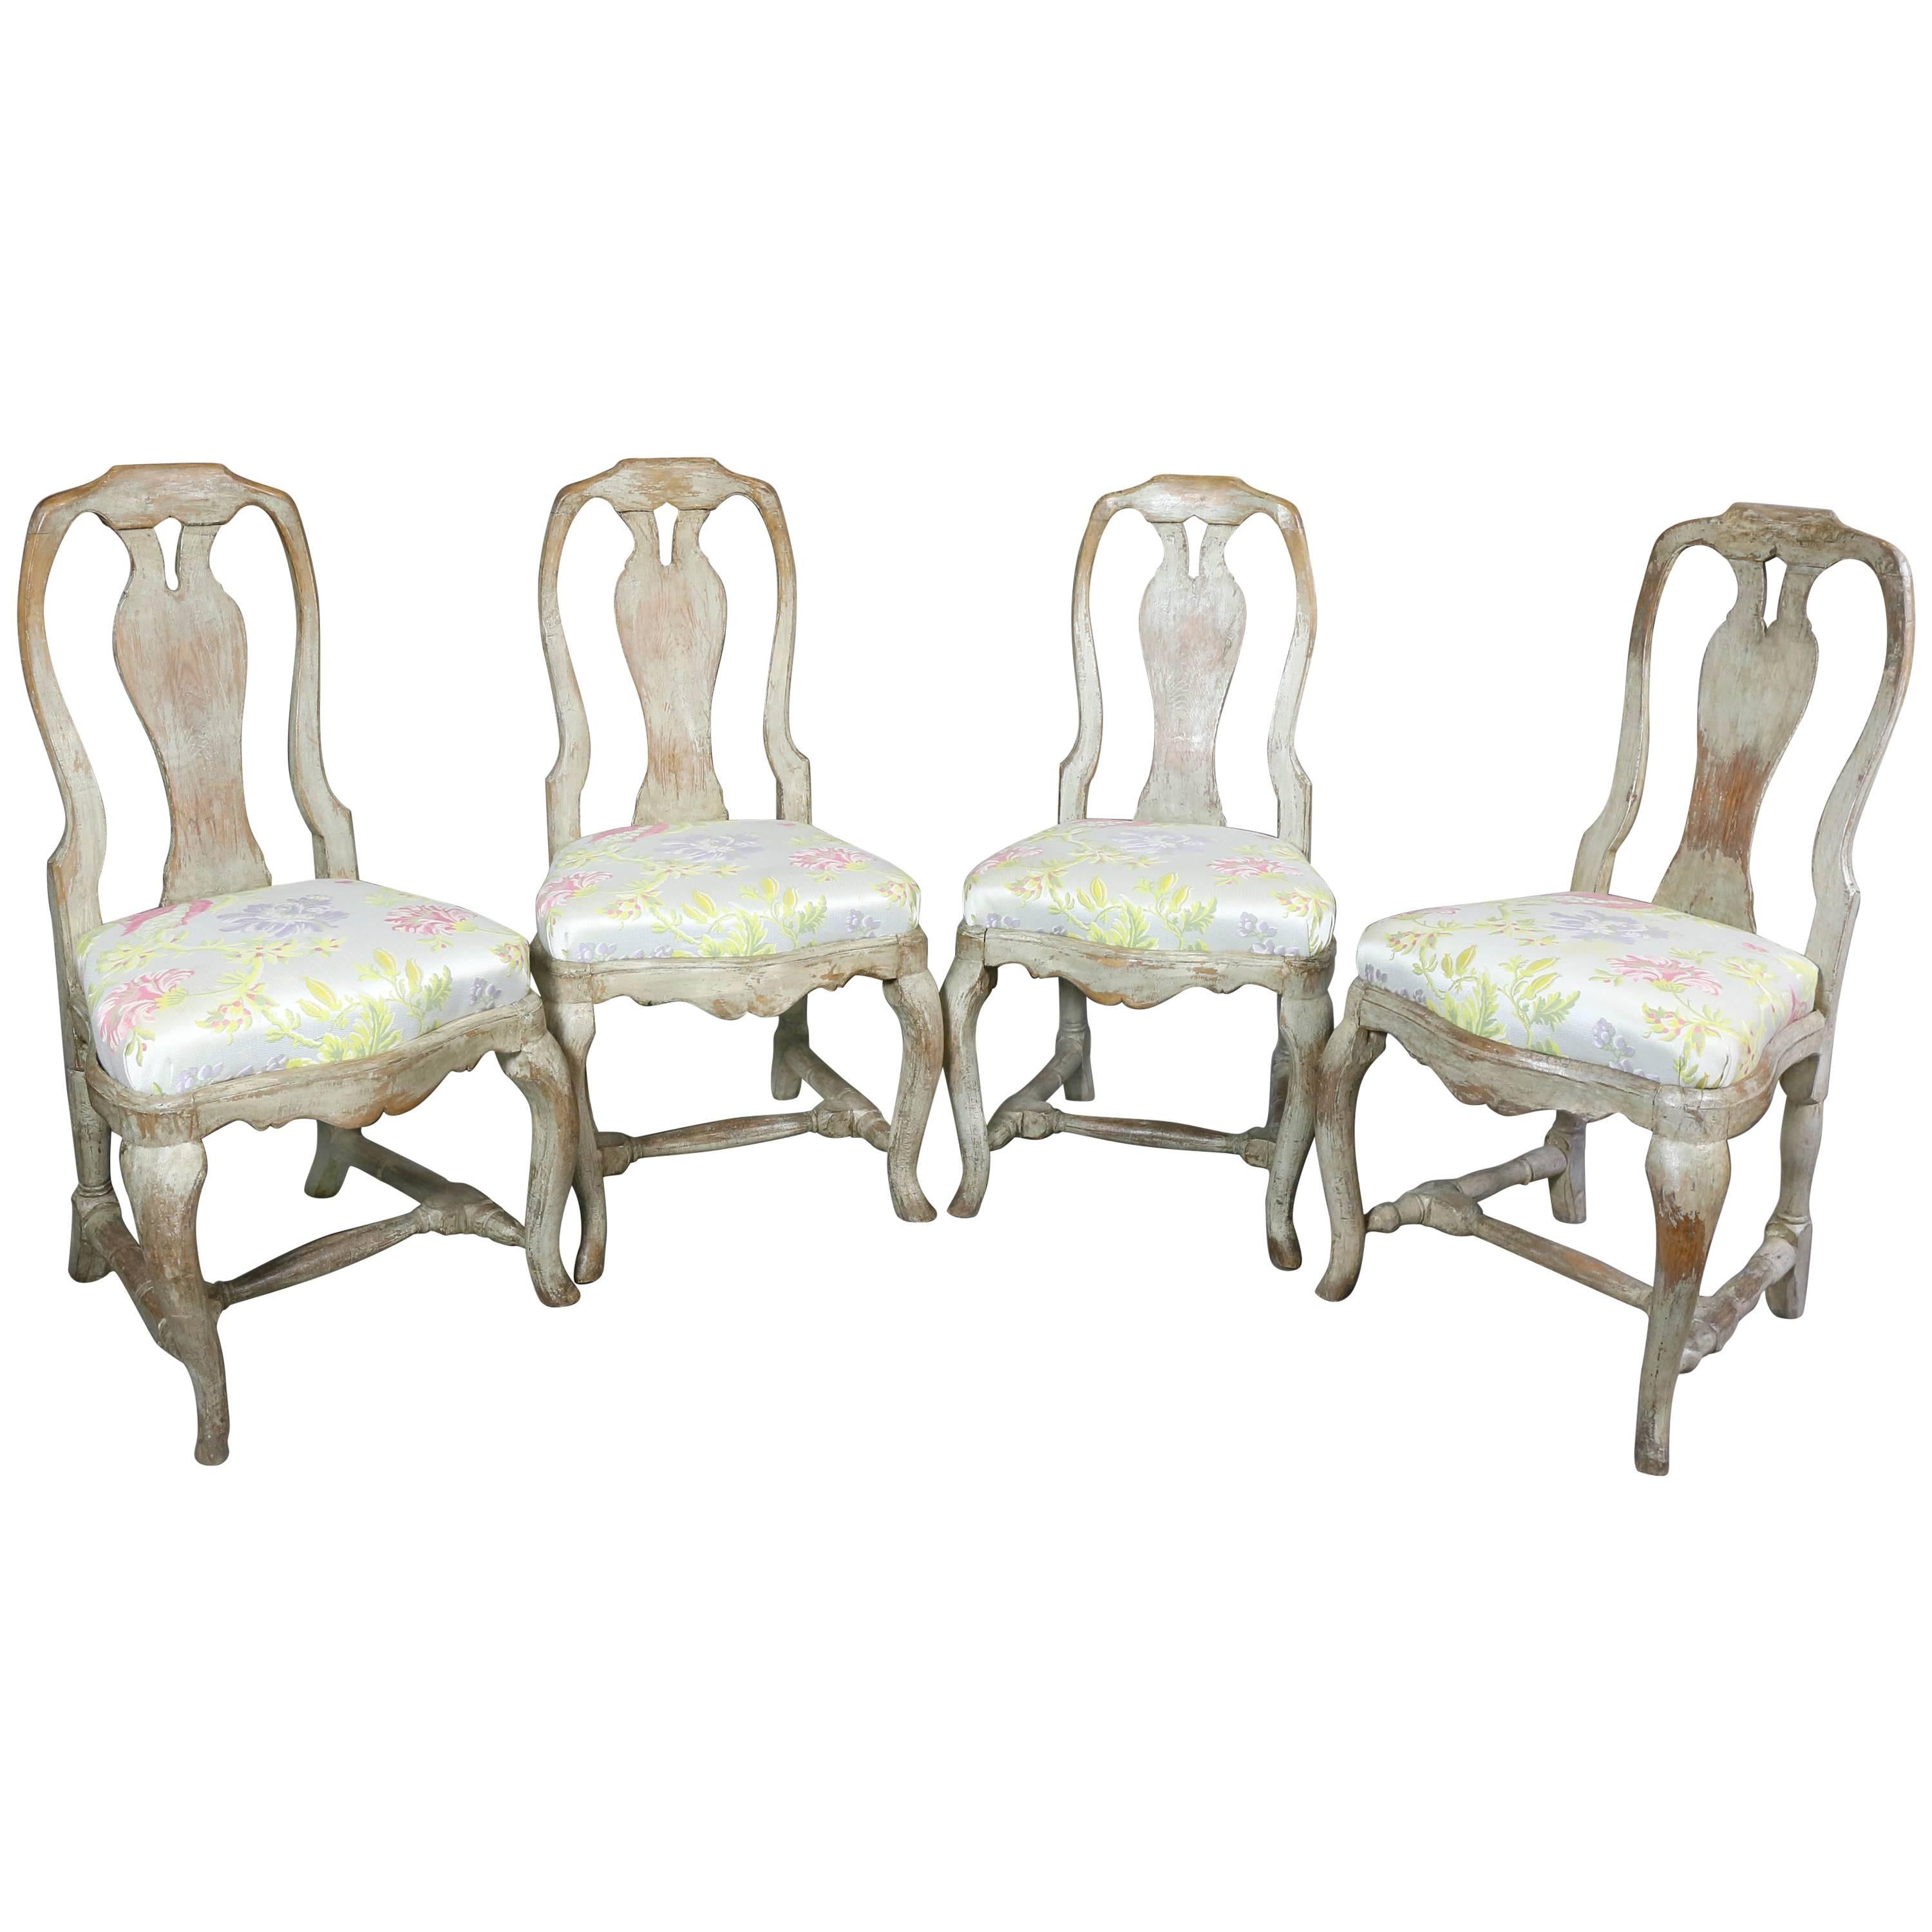 Set of Four Swedish Rococo Painted Dining Chairs